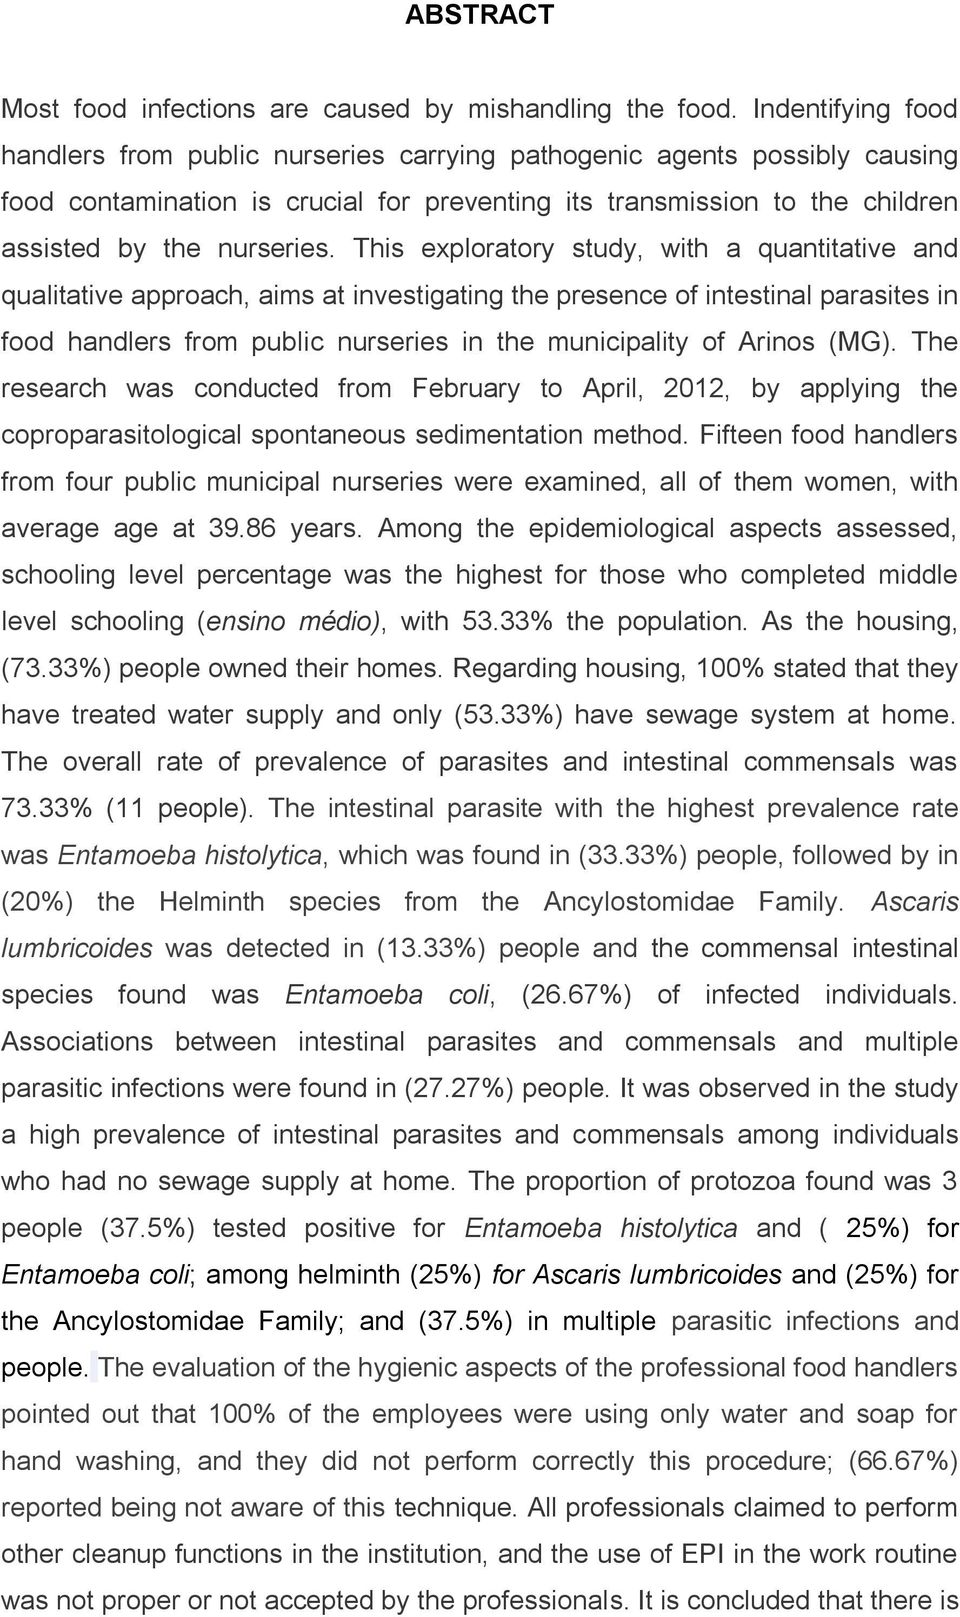 This exploratory study, with a quantitative and qualitative approach, aims at investigating the presence of intestinal parasites in food handlers from public nurseries in the municipality of Arinos